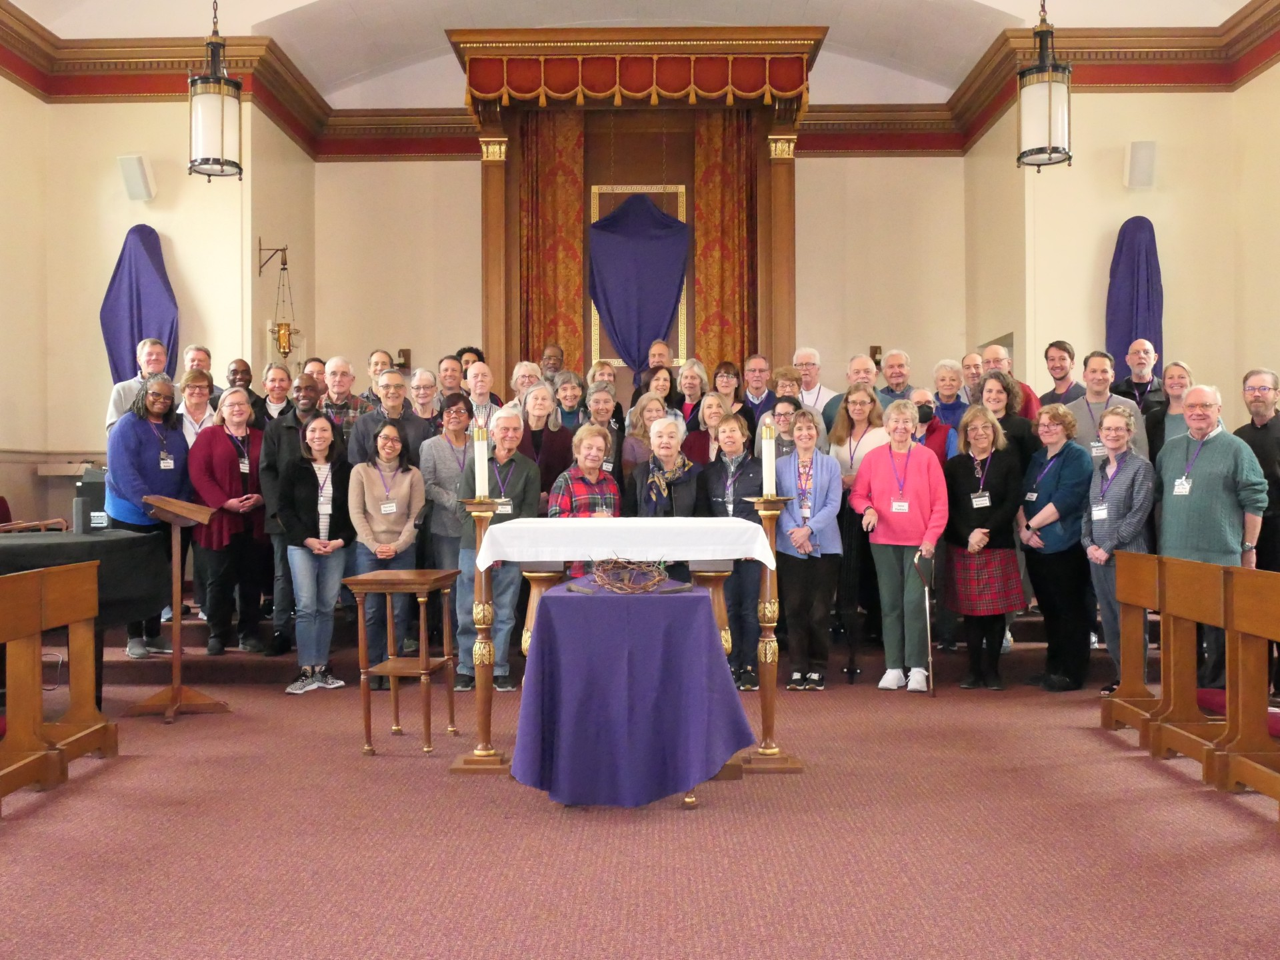 A group photo of retreat participants and leaders, gathered together in the front of a church